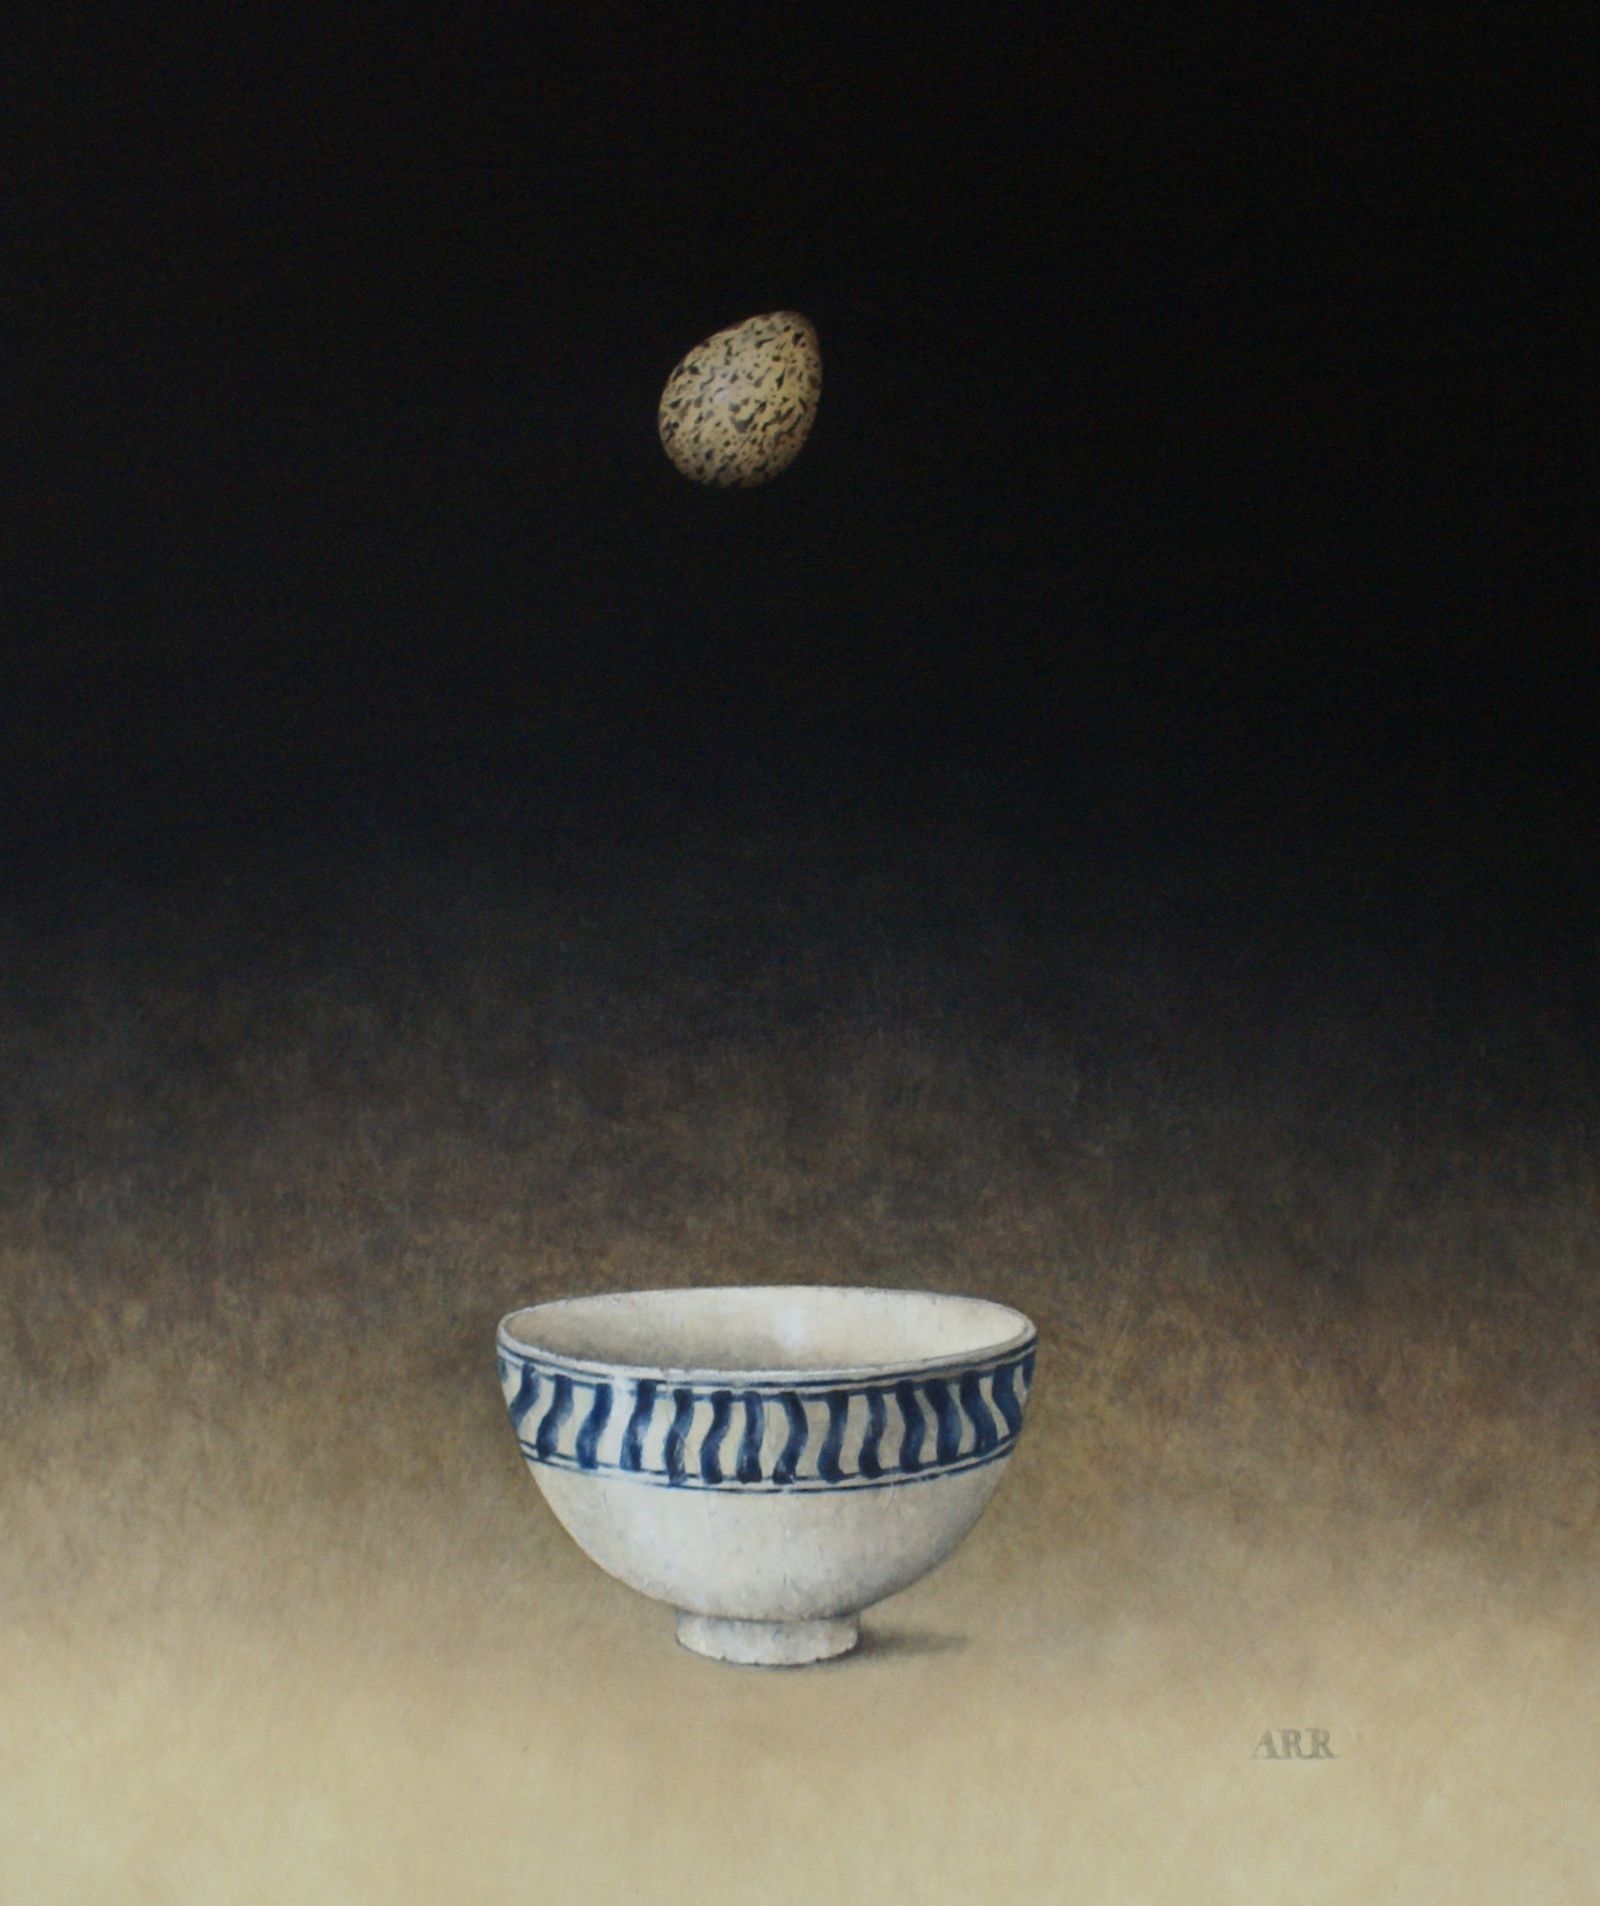  Blue Striped Bowl with Falling Egg by Alison Rankin